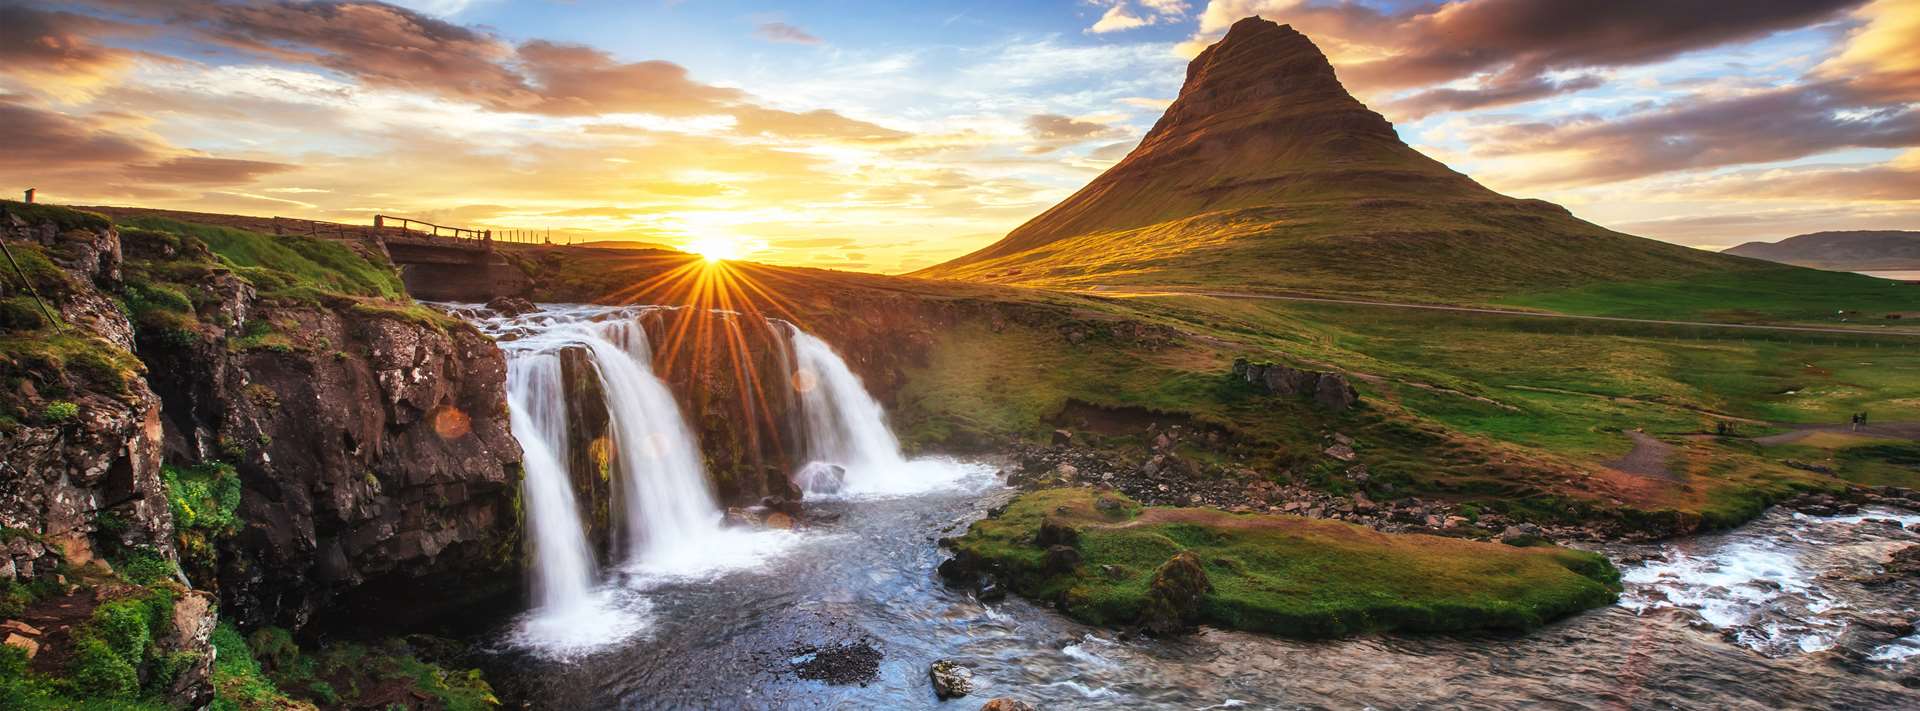 Cheap flights to Iceland from £133 Iceland flights with Netflights